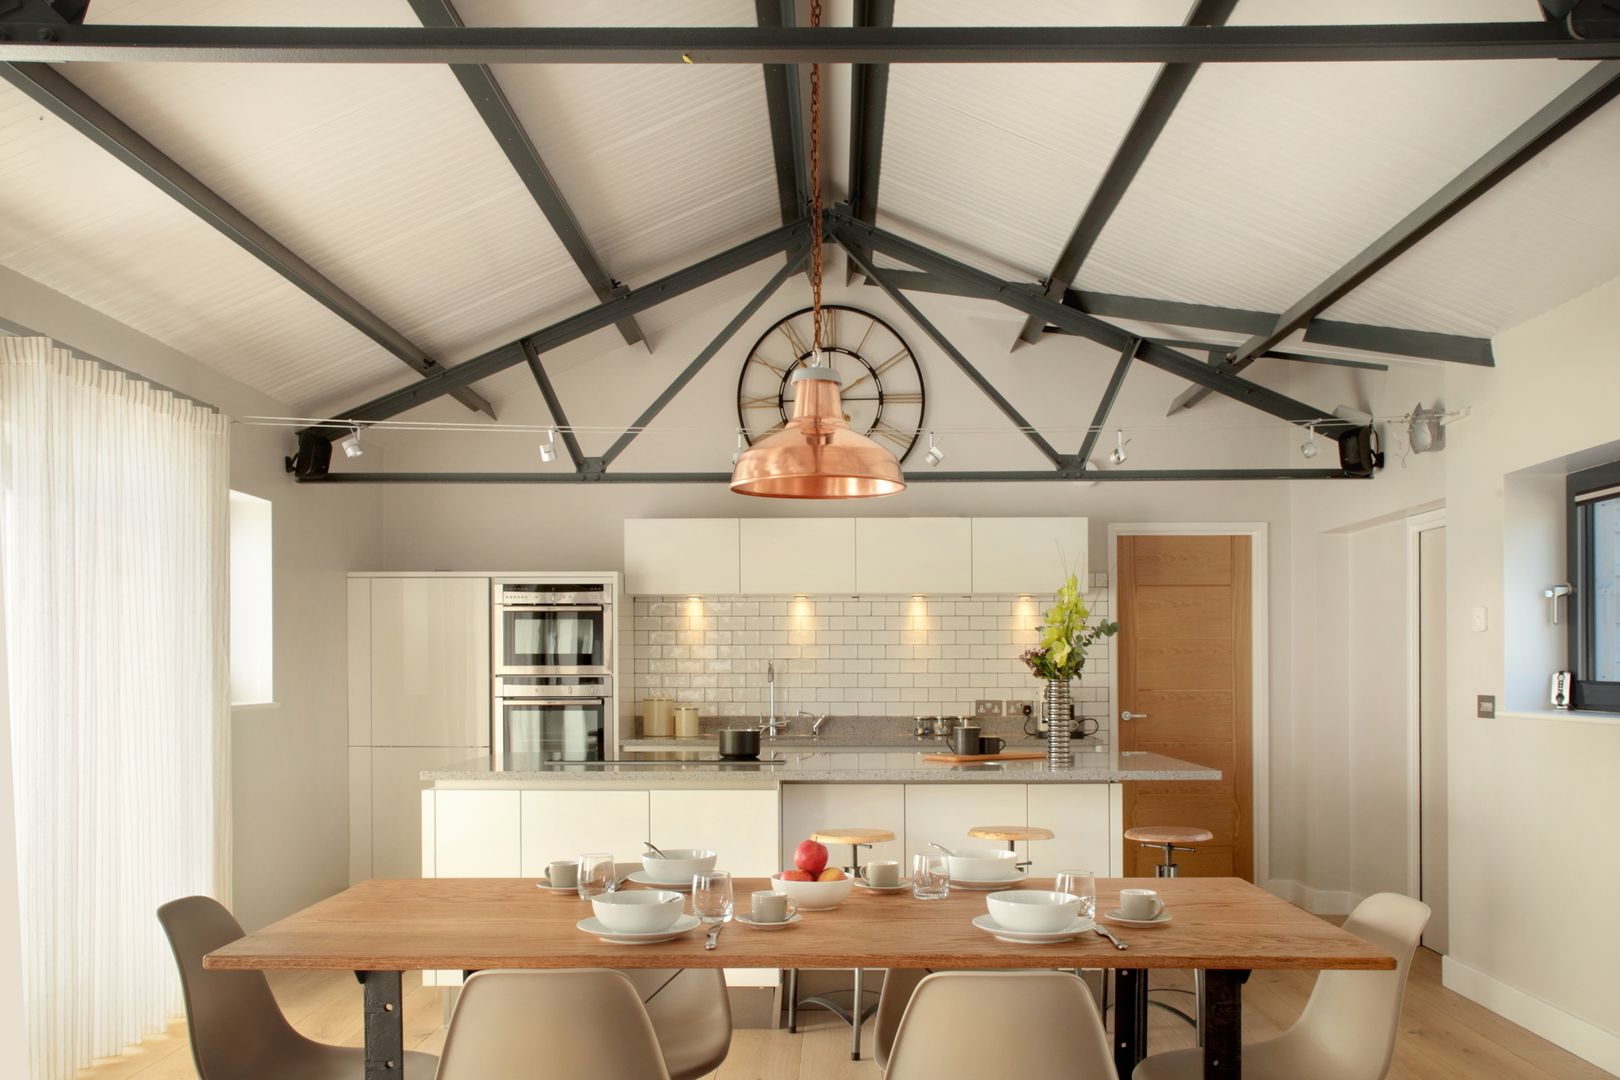 The Cow Shed Barn Conversion Kitchen in-toto Kitchens Design Studio Marlow Cucina in stile classico